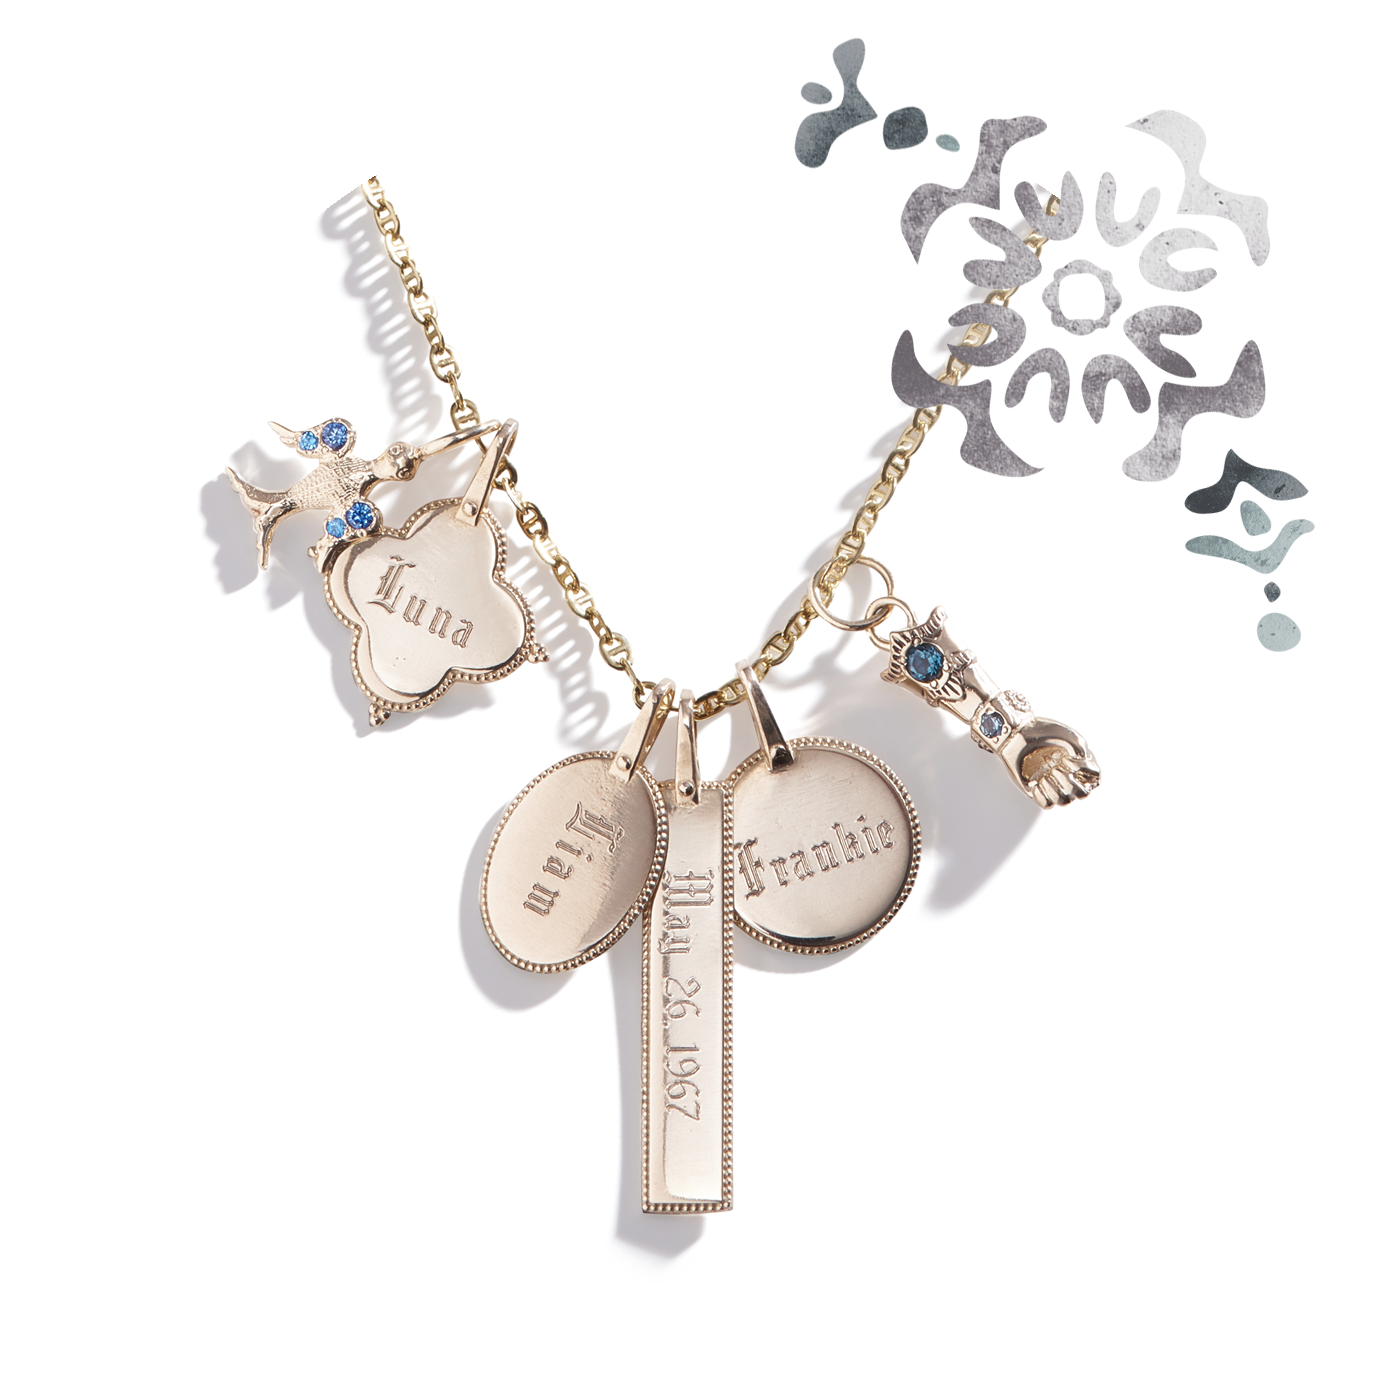 Gold Personalized Necklace with Customizable Figa Charm